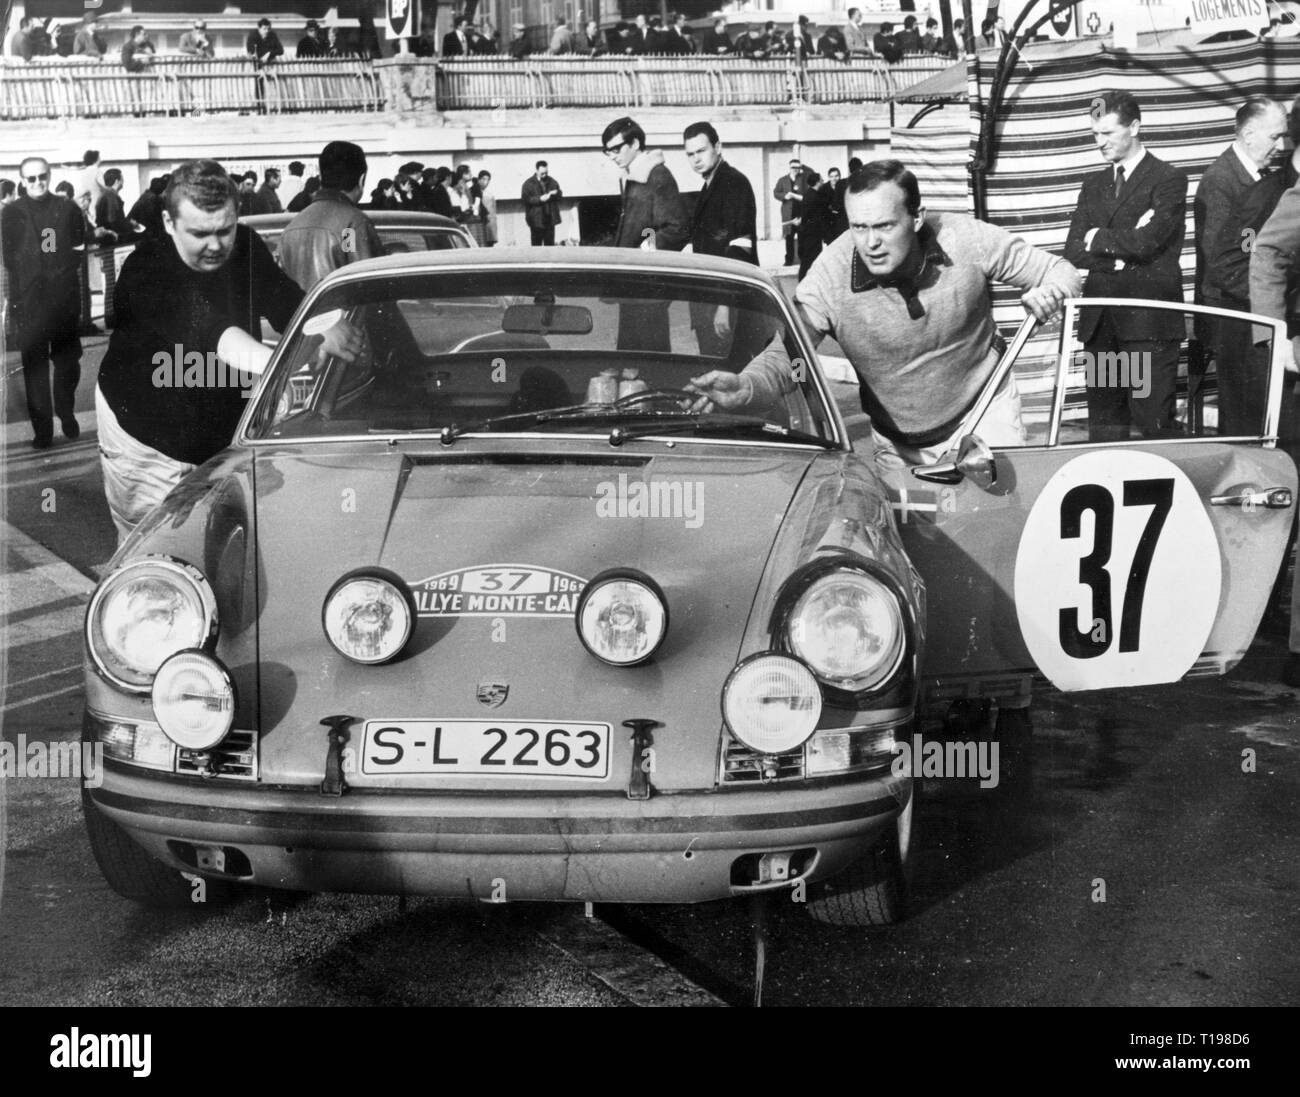 sports, car racing, Monte Carlo Rally, future winners Lars Helmer, Bjoern Waldegard, with Porsche 911 S, Monaco-Vals, 23.1.1969, Additional-Rights-Clearance-Info-Not-Available Stock Photo